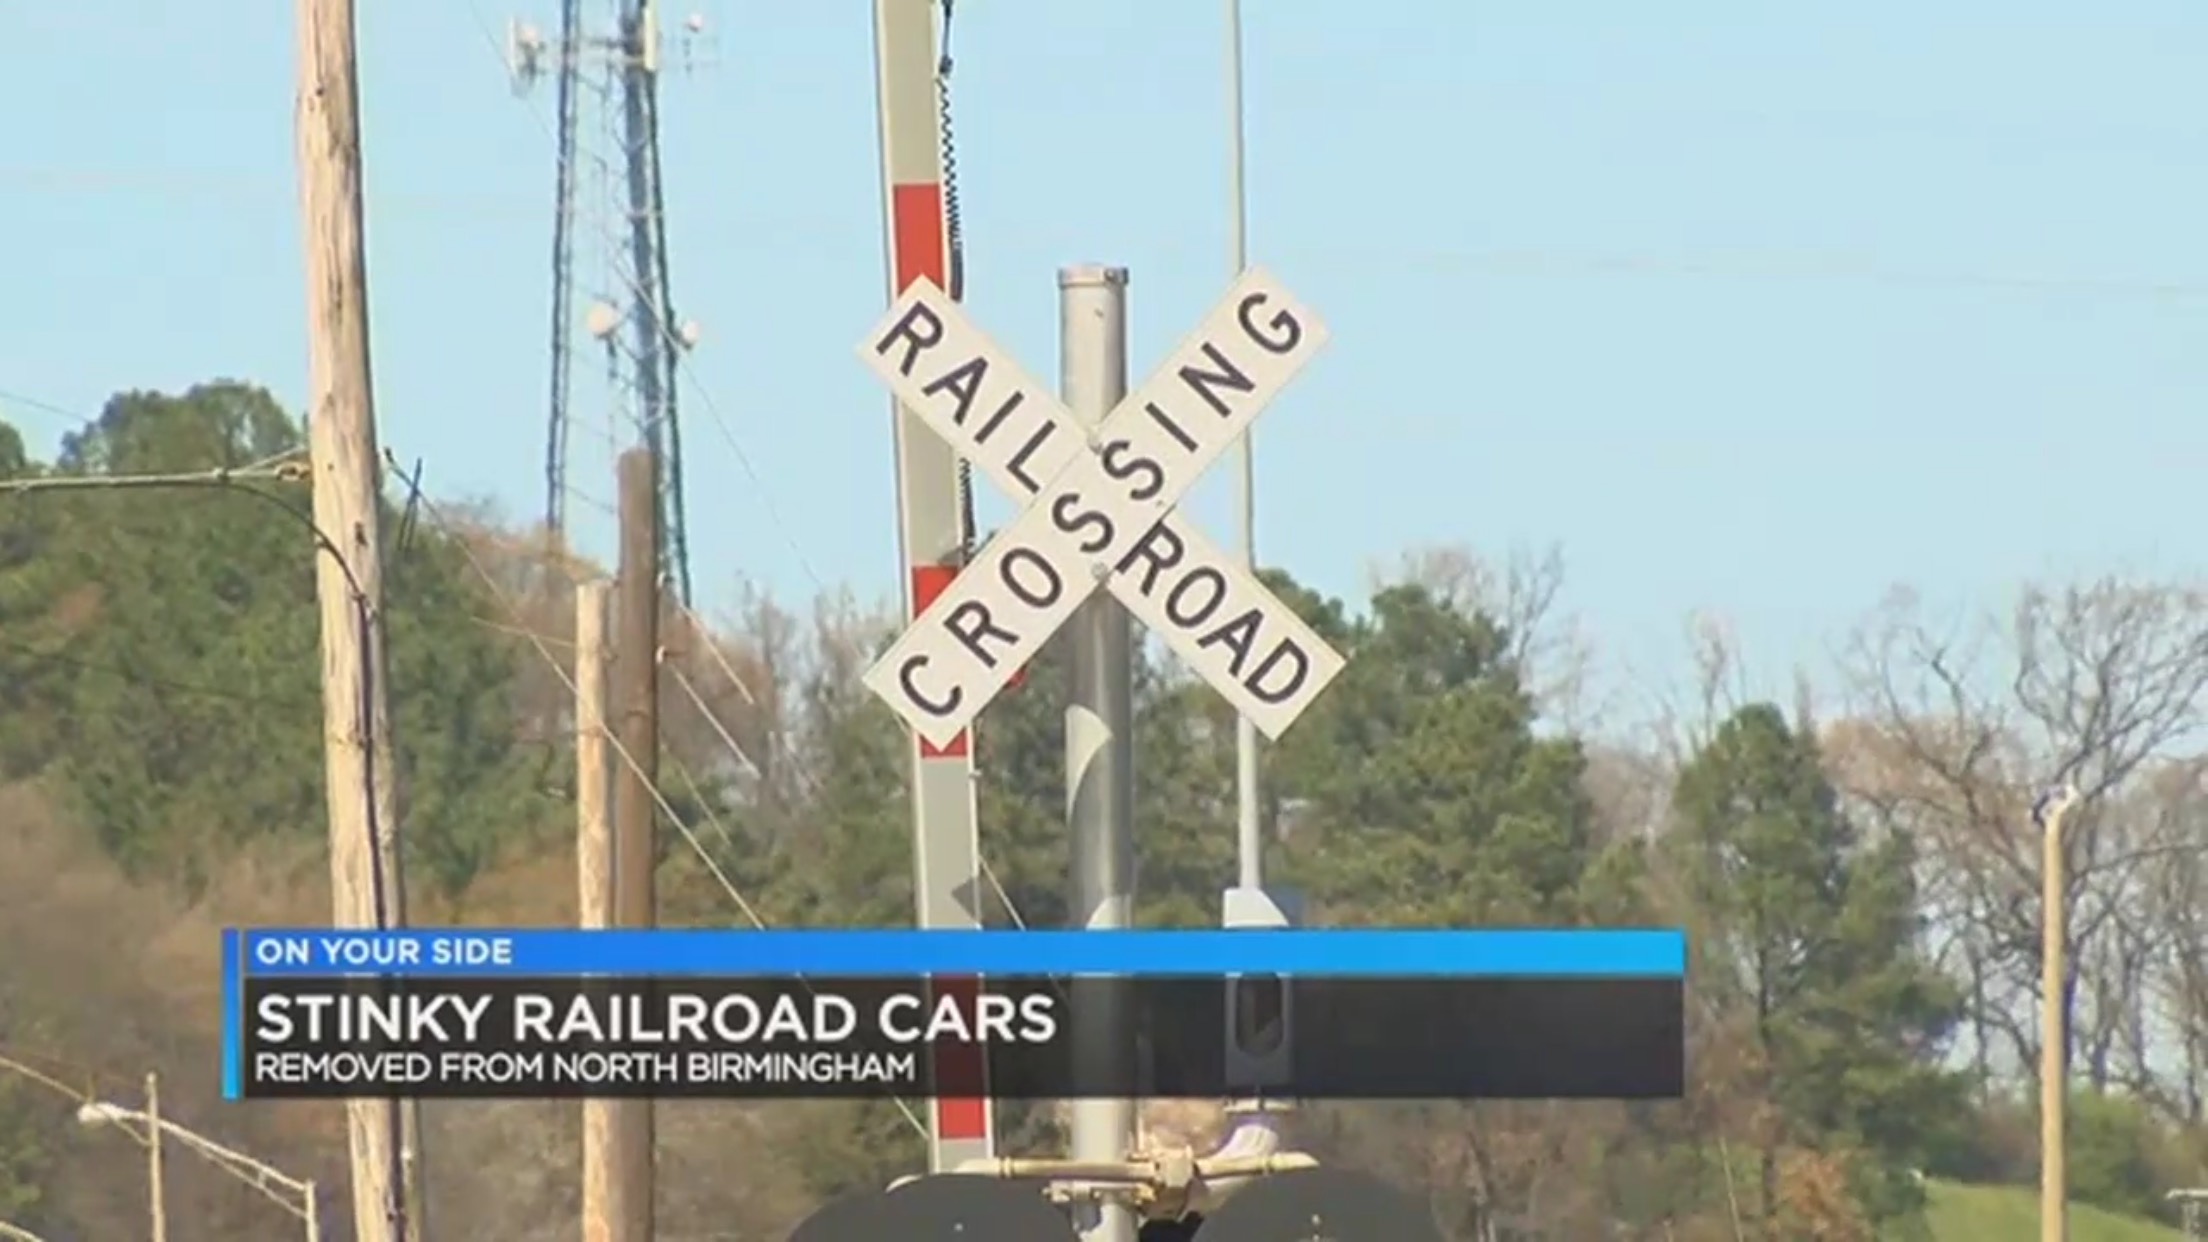 Stinky Railroad Cars Removed From North Birmingham